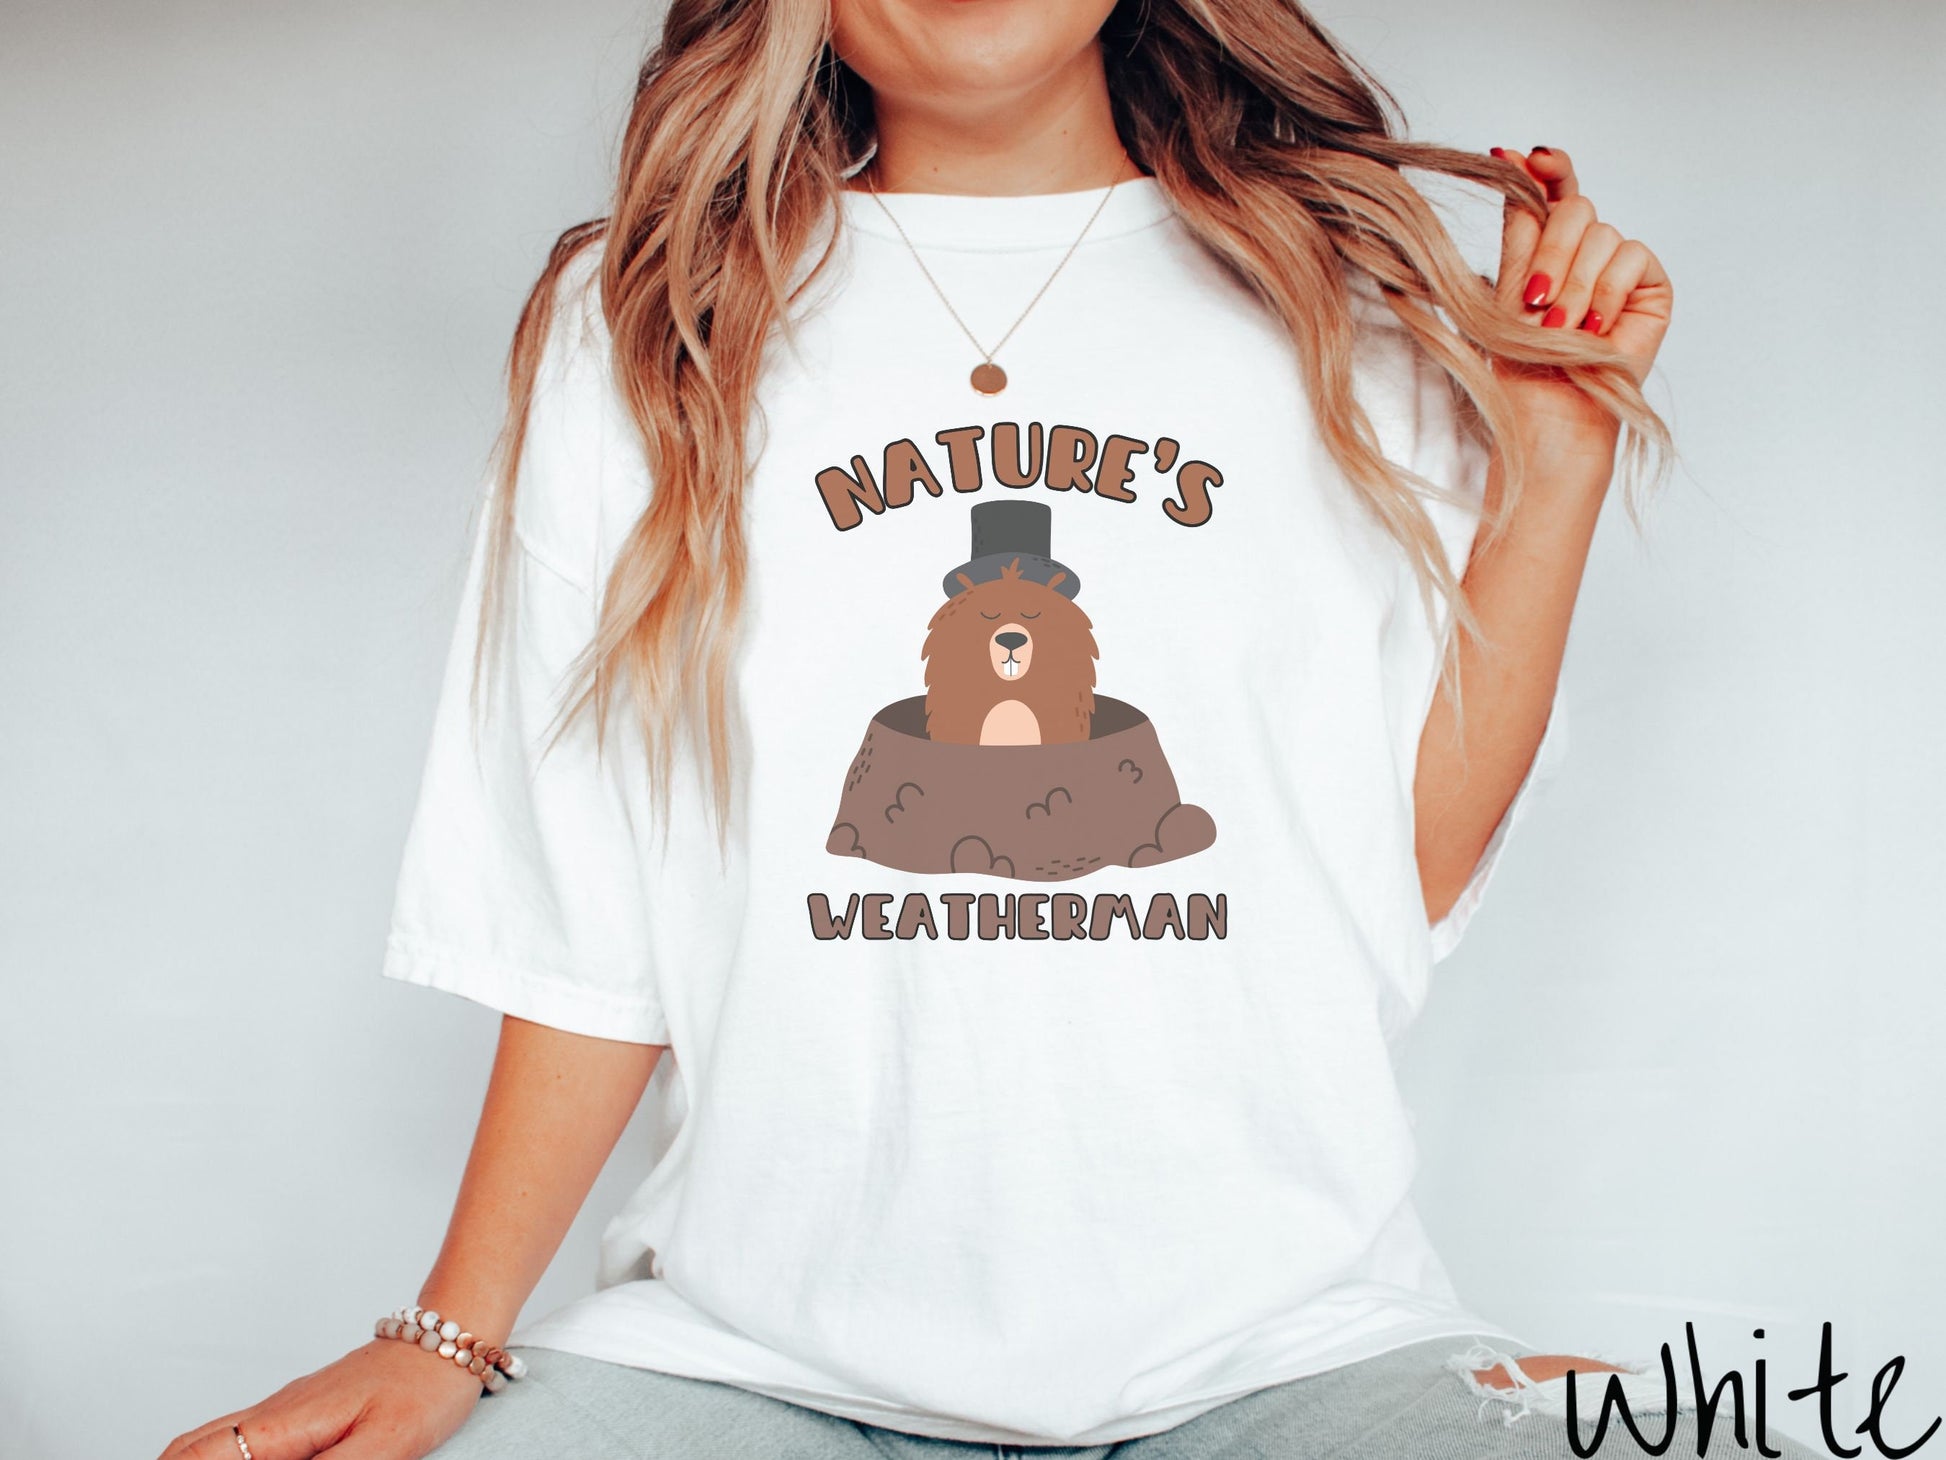 A woman wearing a cute white colored shirt with the text Natures Weatherman sandwiching Phil the Punxsutawney PA groundhog who is wearing a black top hat and is coming out of his hole for Groundhogs Day.